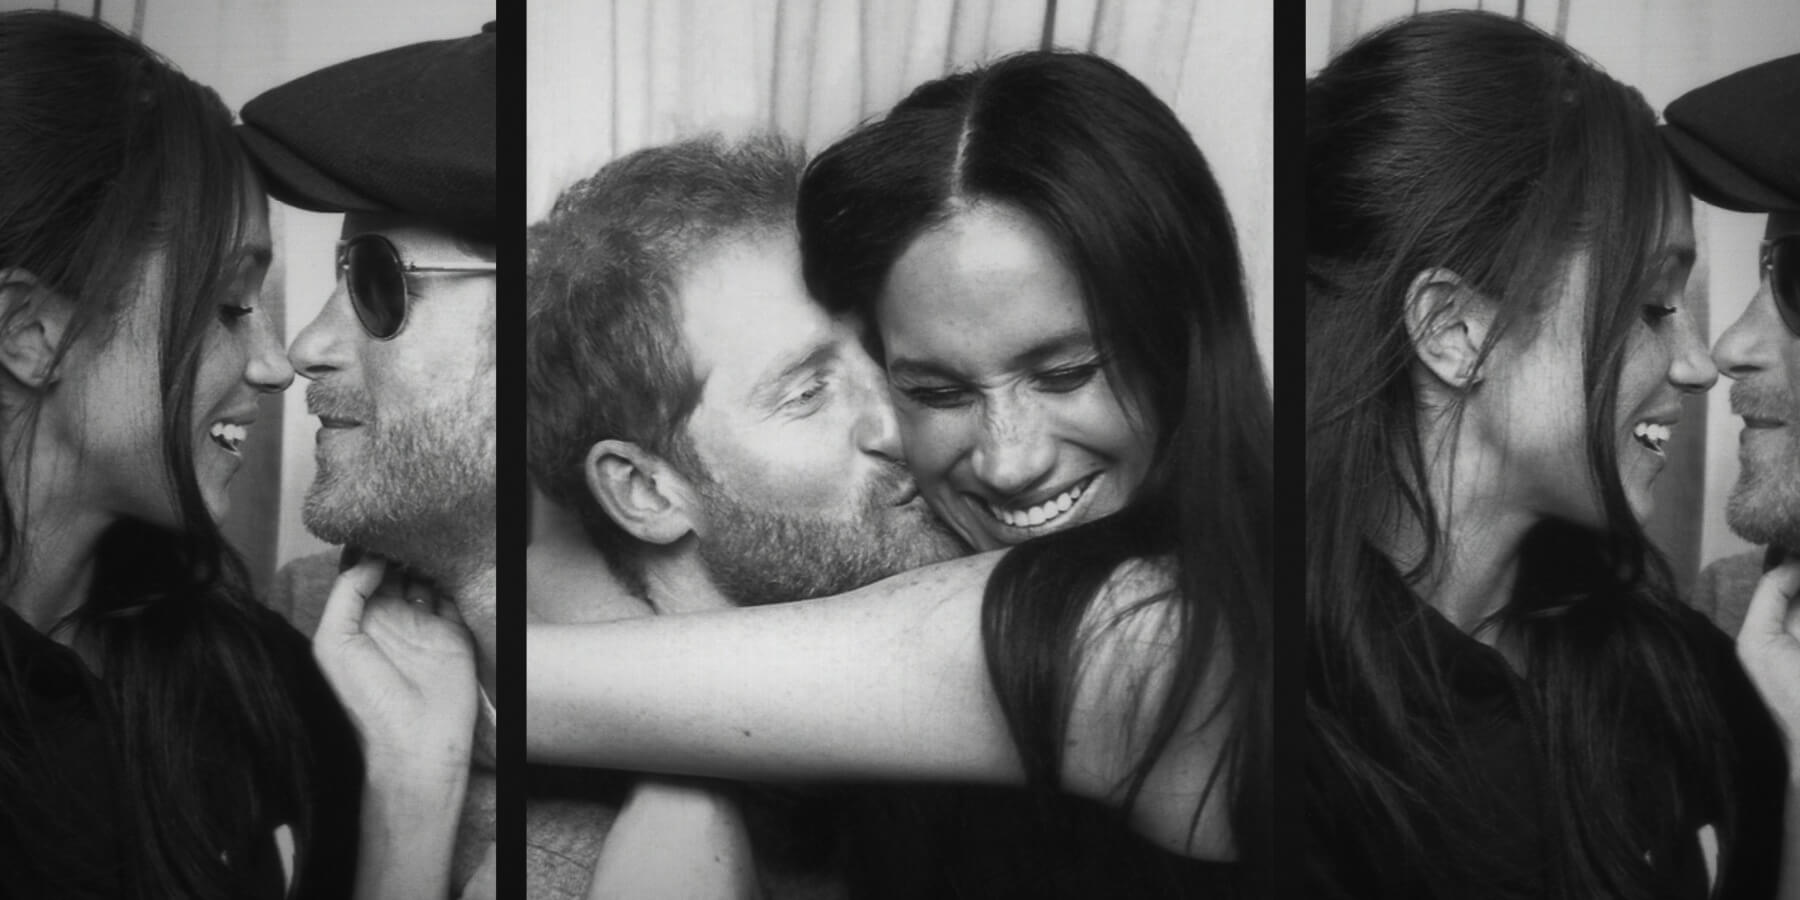 Prince Harry and Meghan Markle's personal photographs from the early days of their relationship.